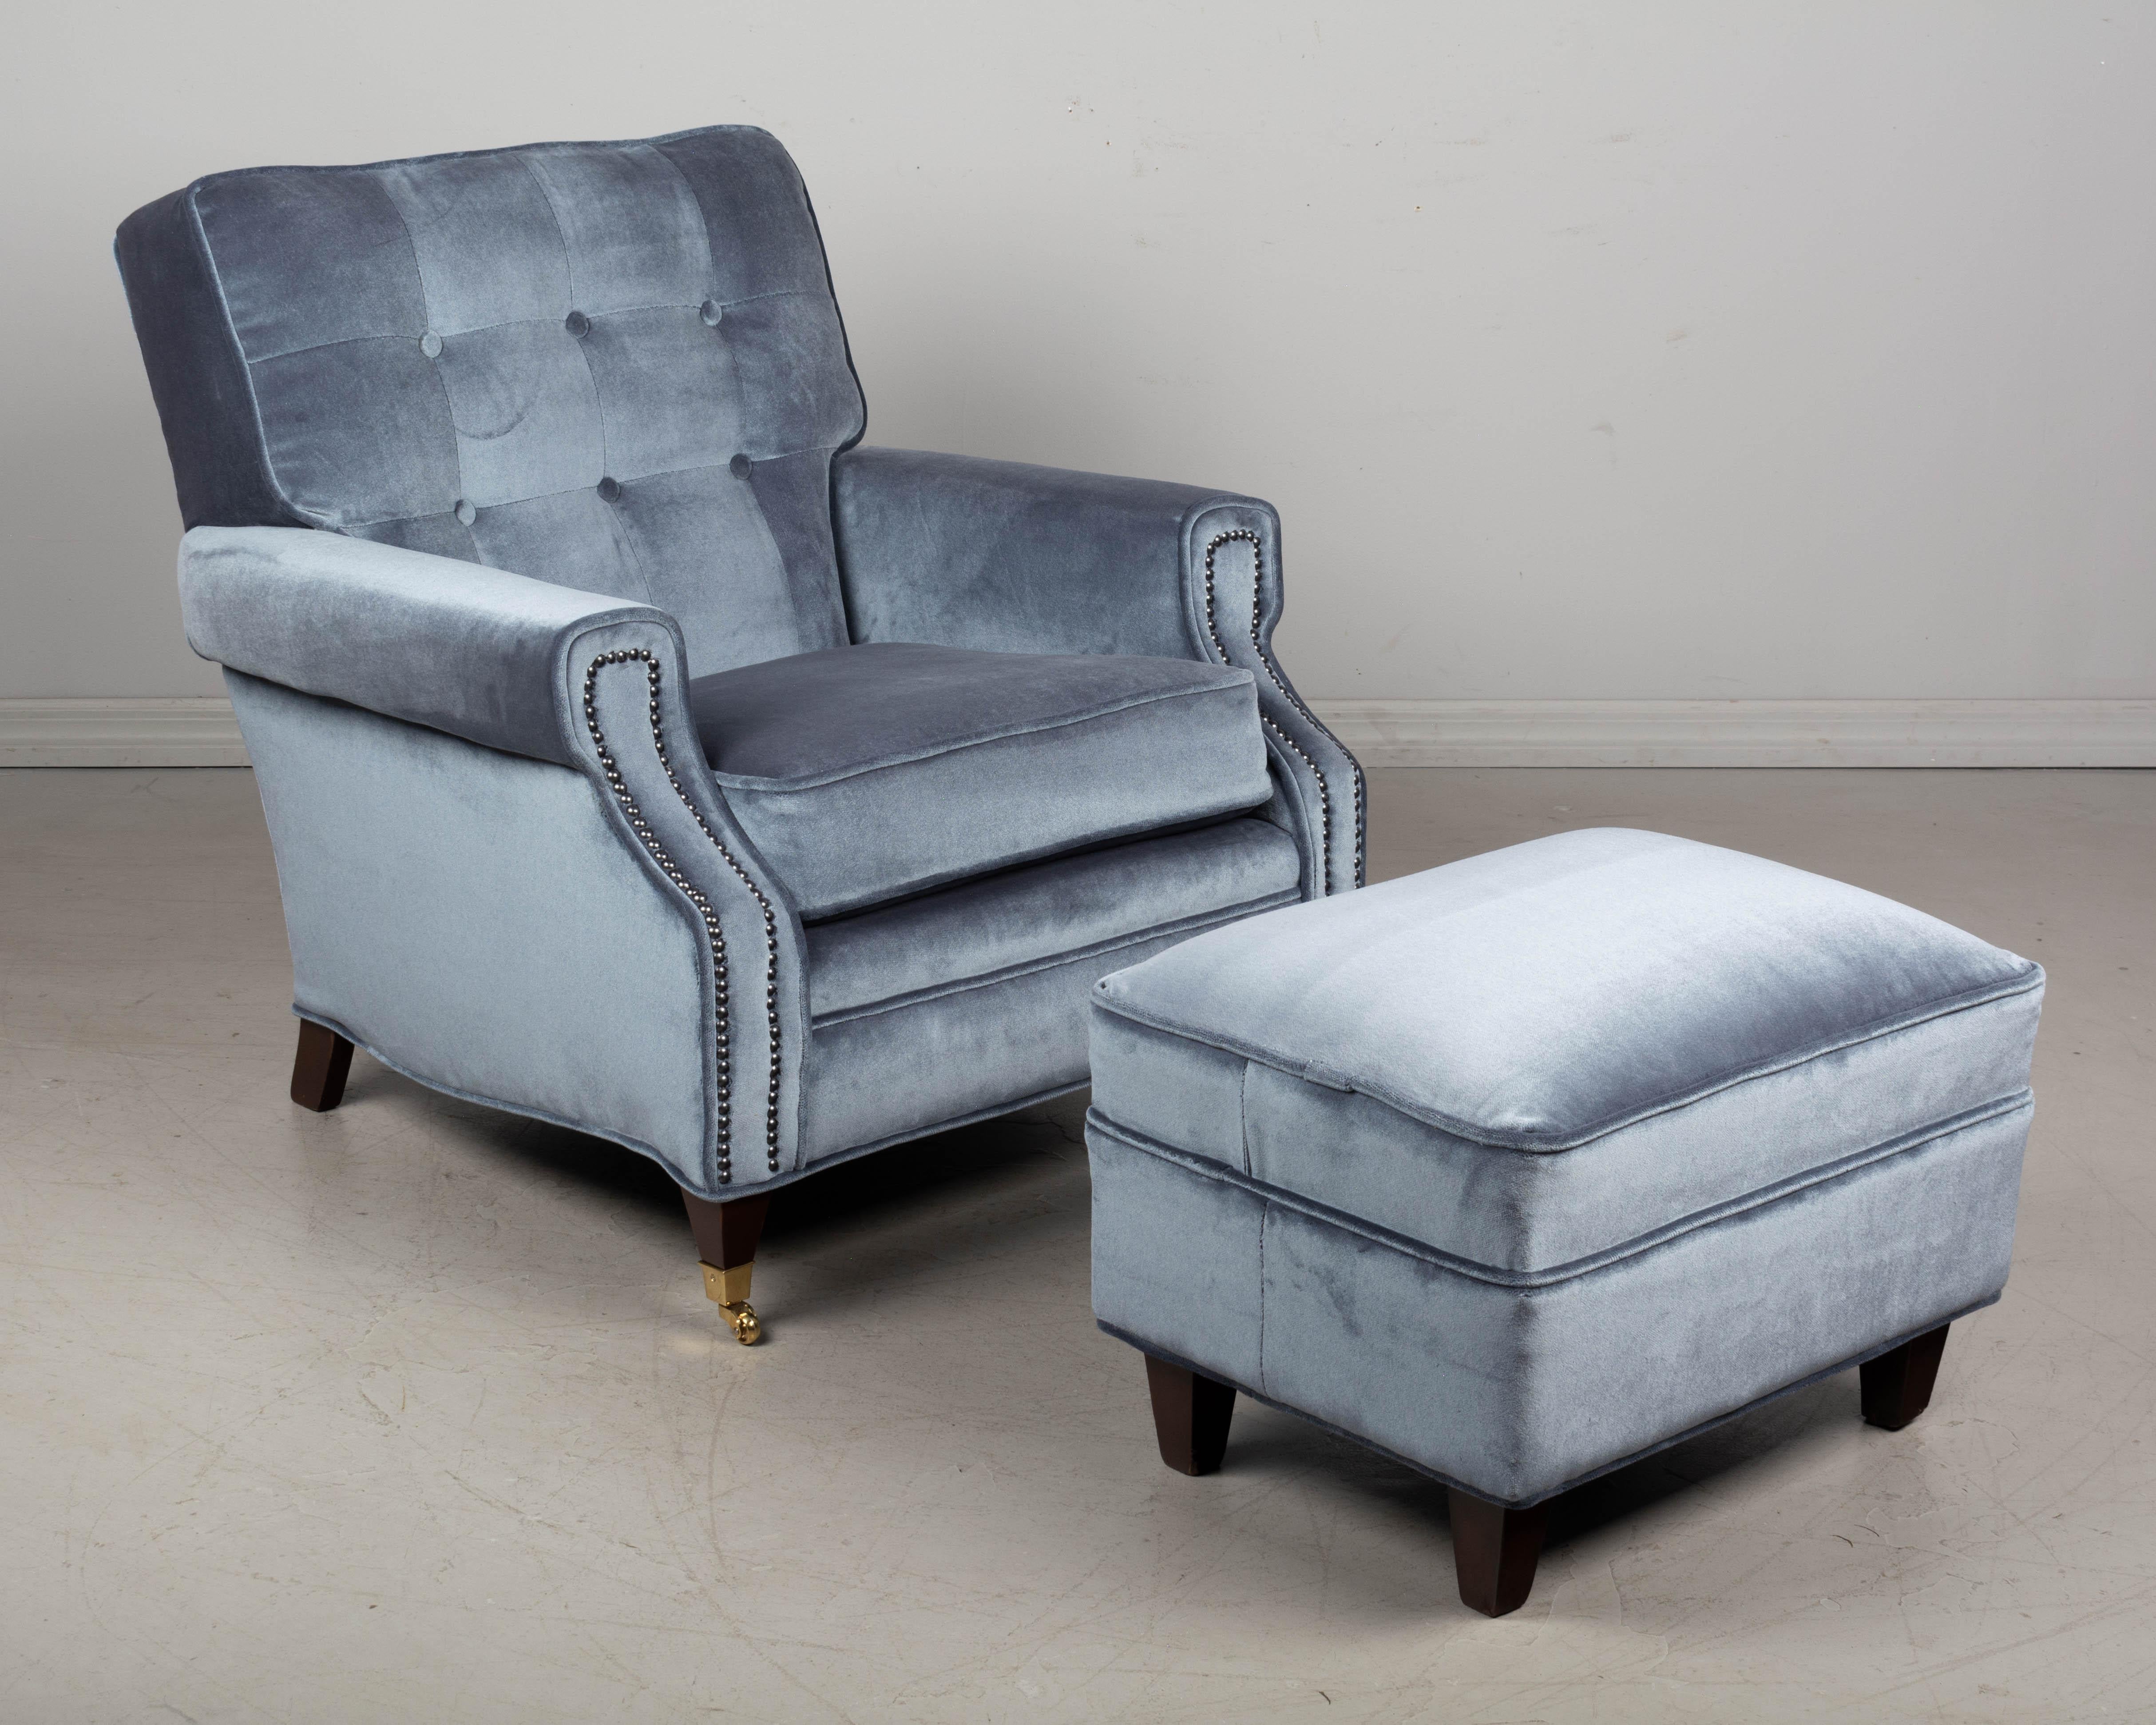 A Mid Century Modern club chair and ottoman upholstered in Sunbrella slate velvet. A comfortable lounge or library chair expertly reupholstered in good quality, hard-wearing performance fabric. Tight back with buttons, nailhead trim on arms and new